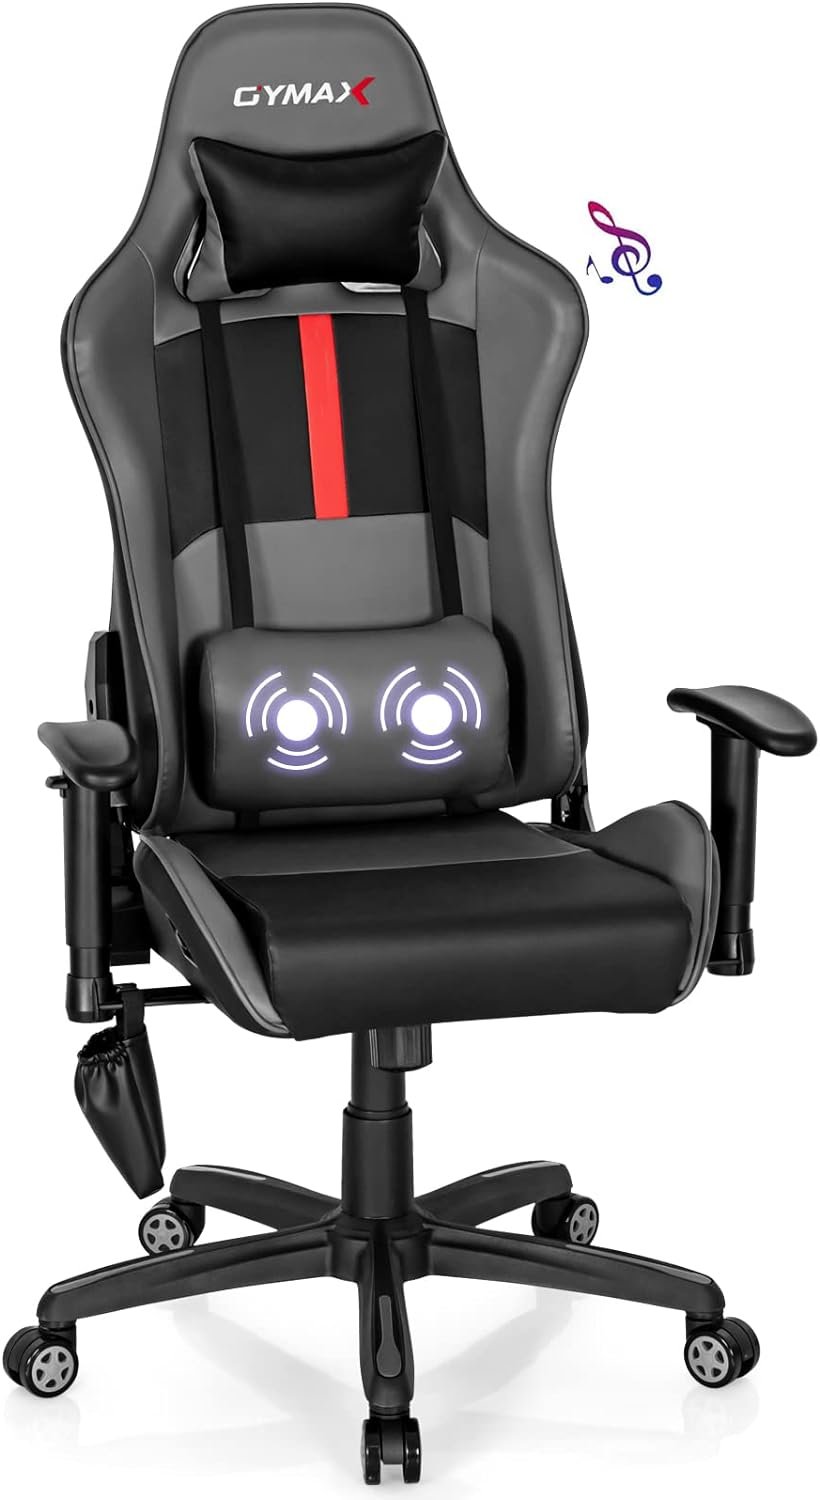 Ergonomic Gaming Chair with Massage Review